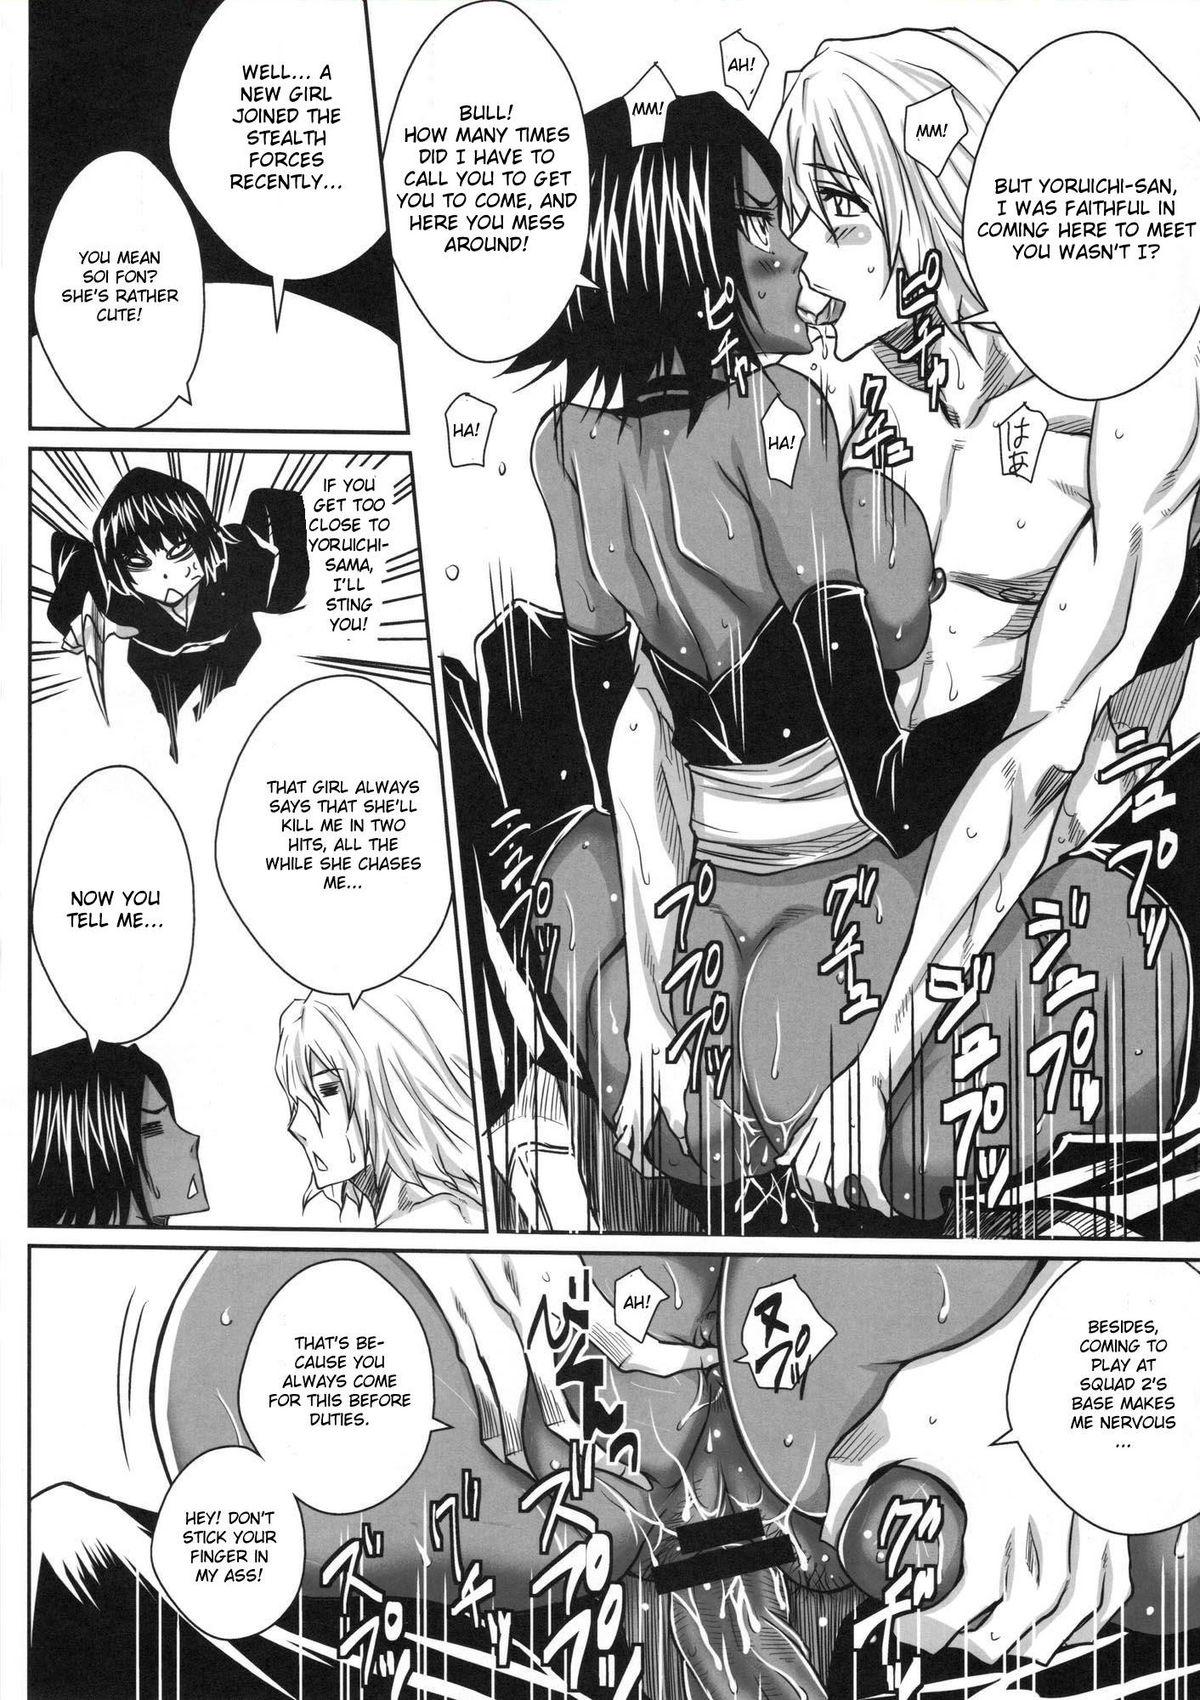 Creampies Yoru | Night - Bleach Leather - Page 4